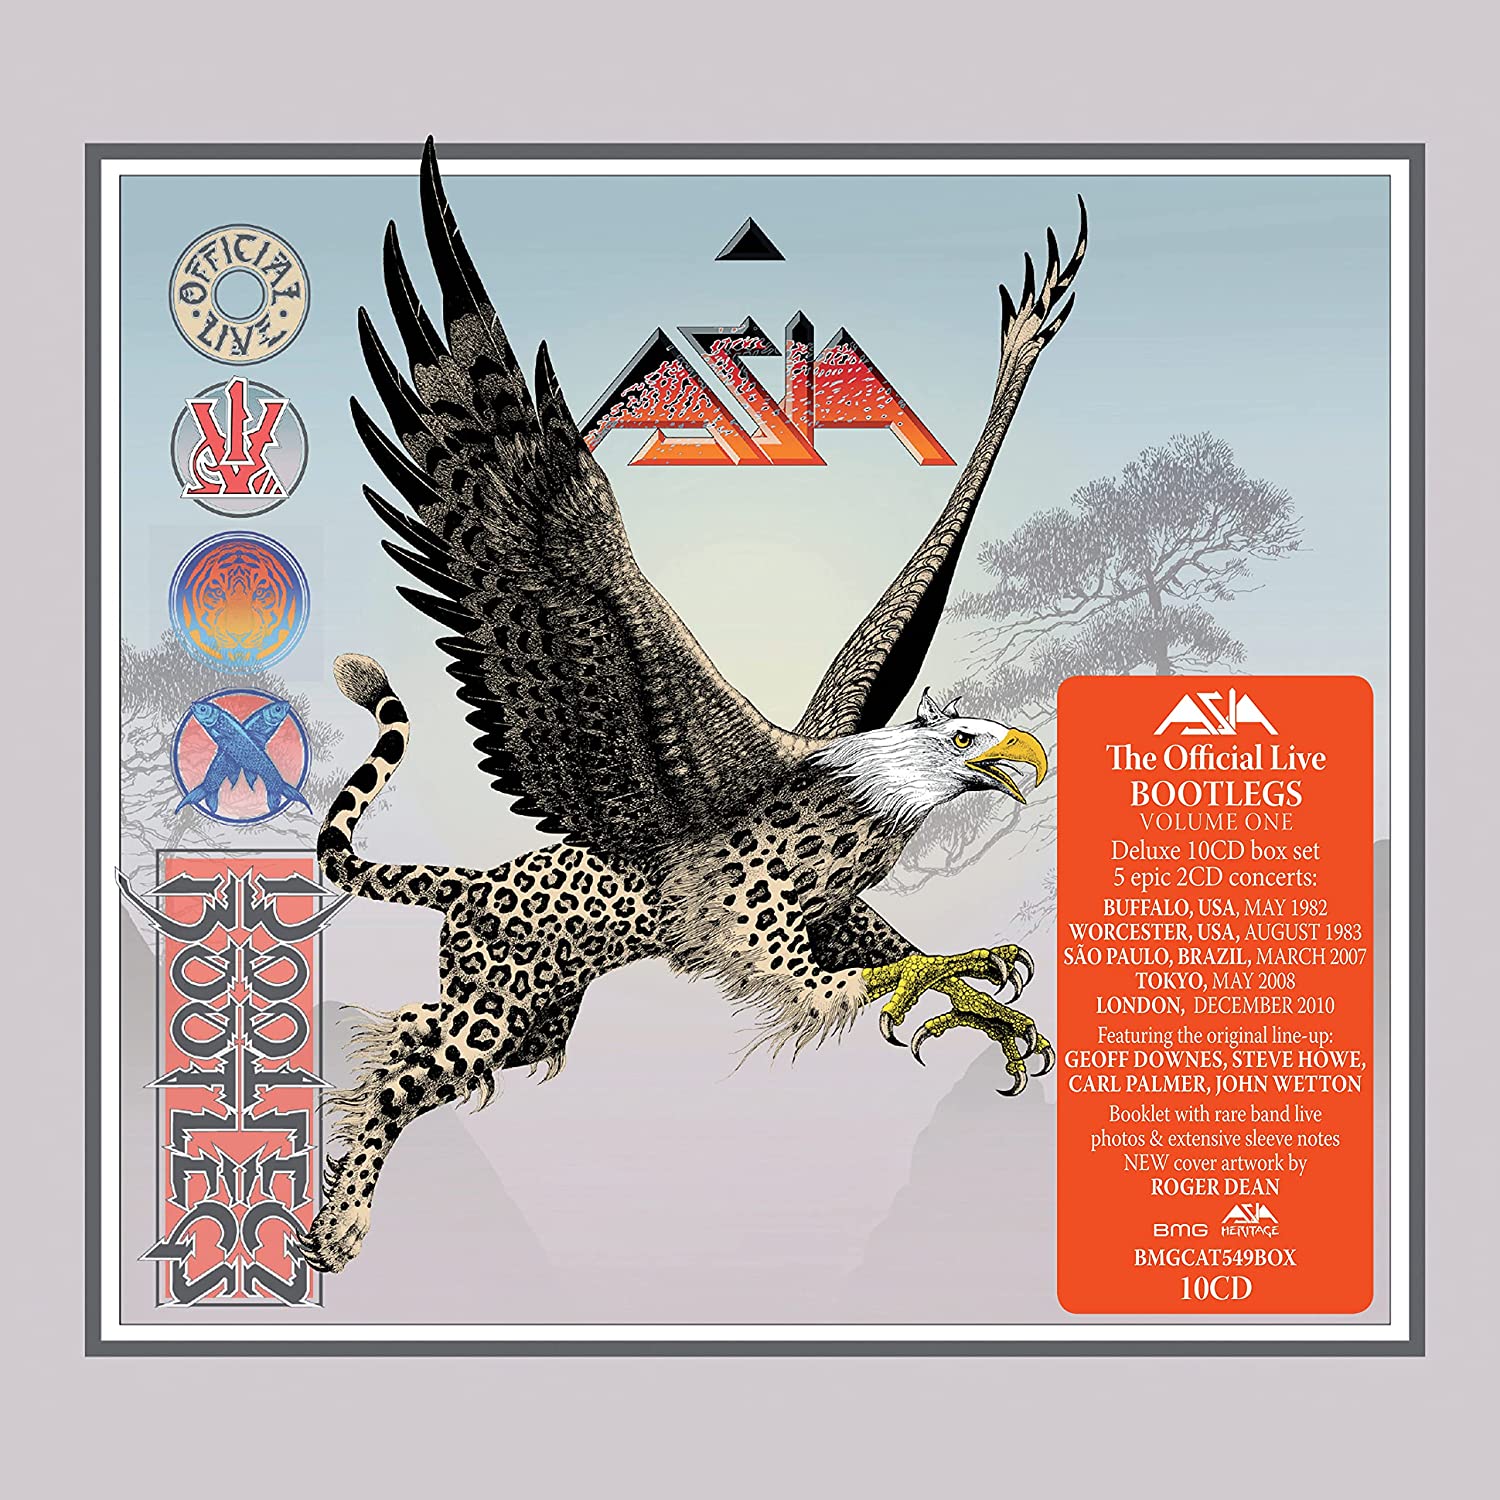 Asia - The Official Live Bootlegs Volume One (Review) - The Prog